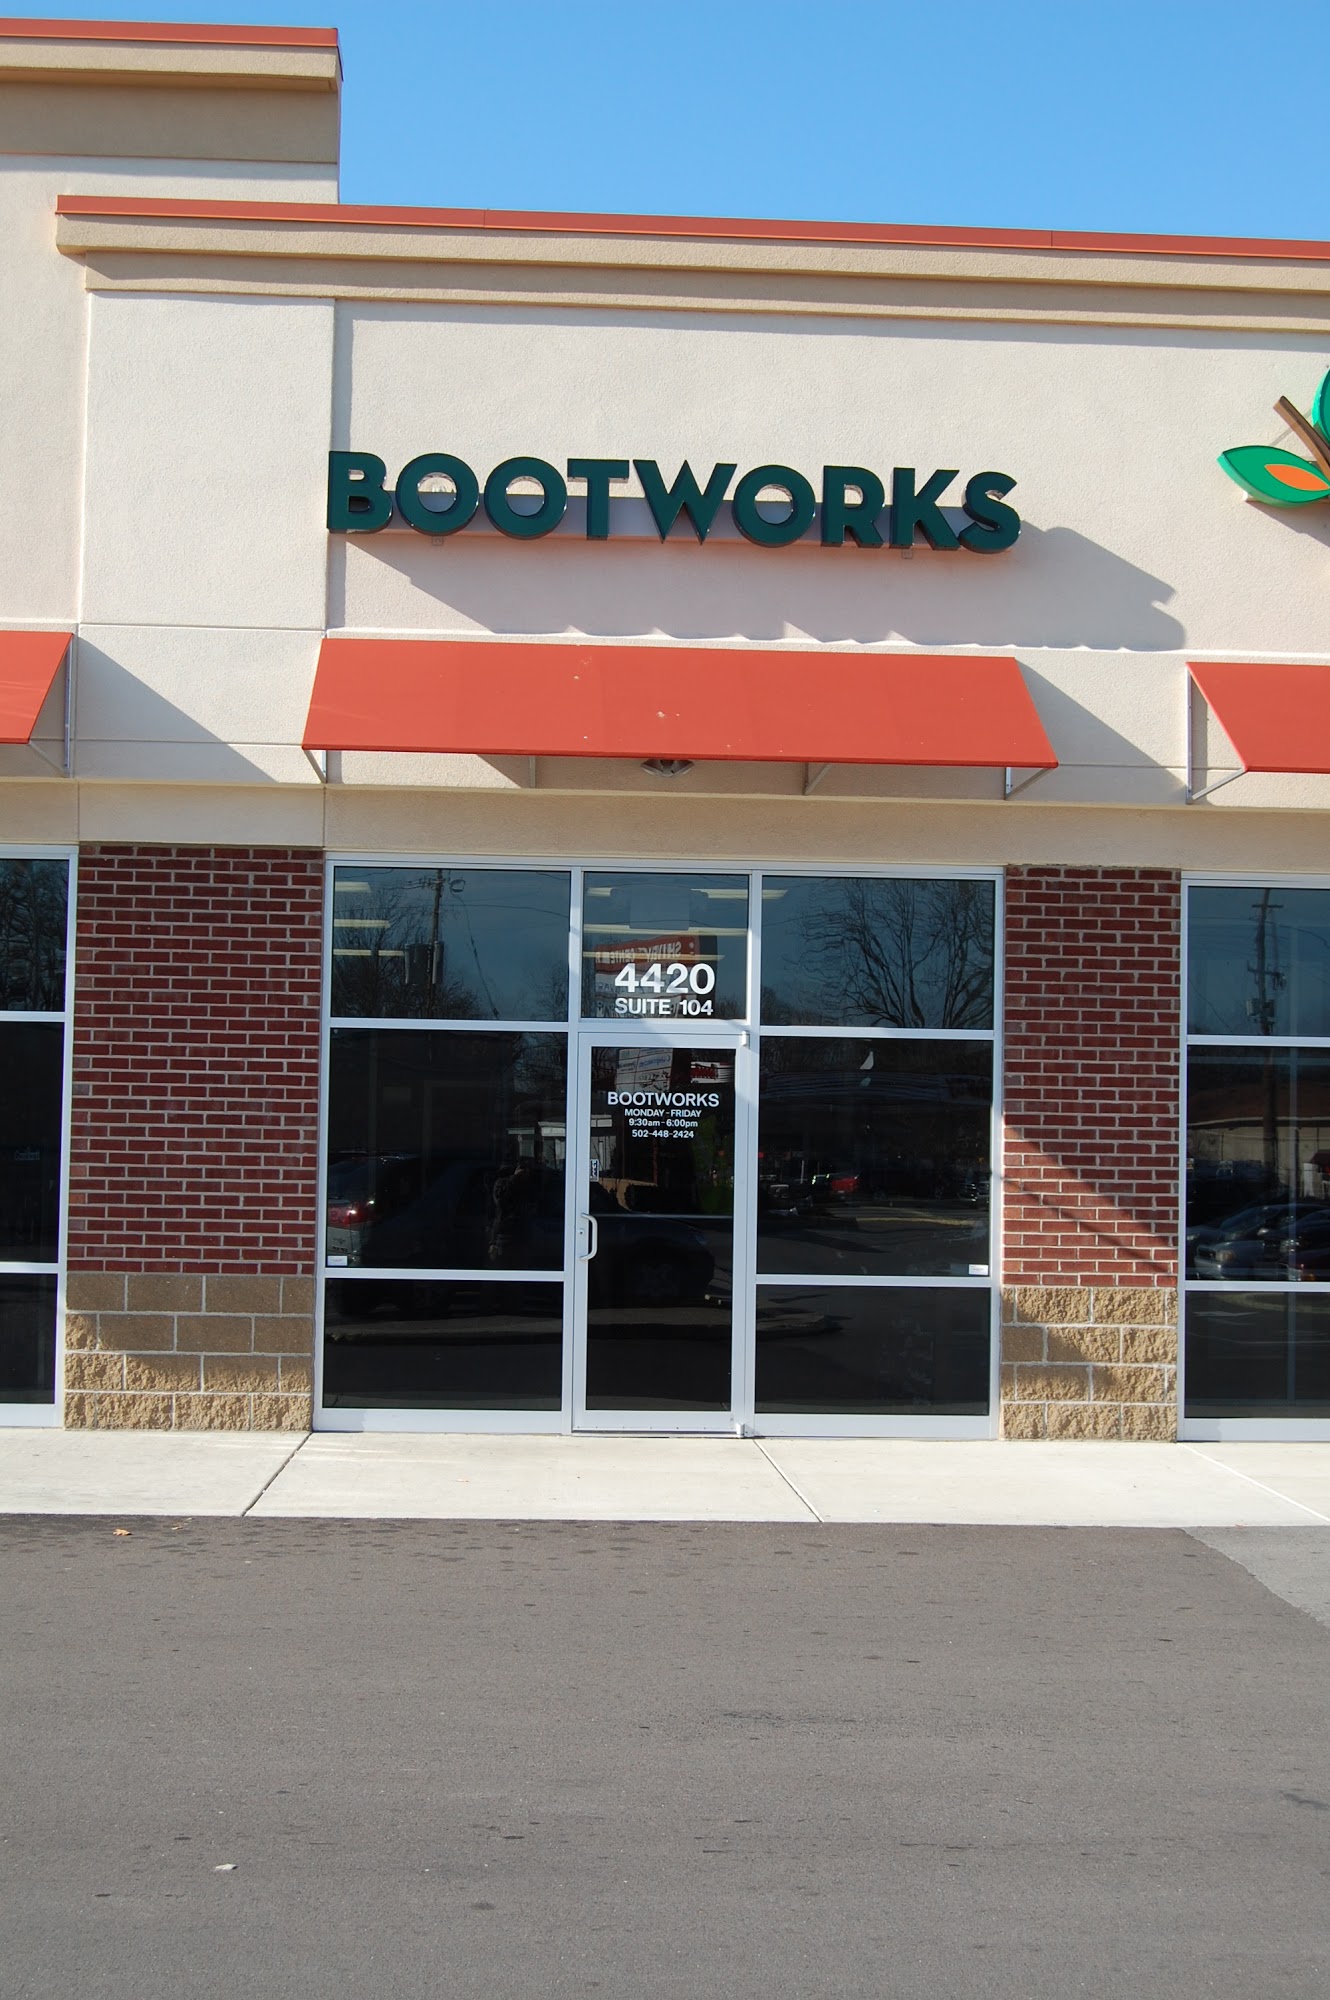 Bootworks